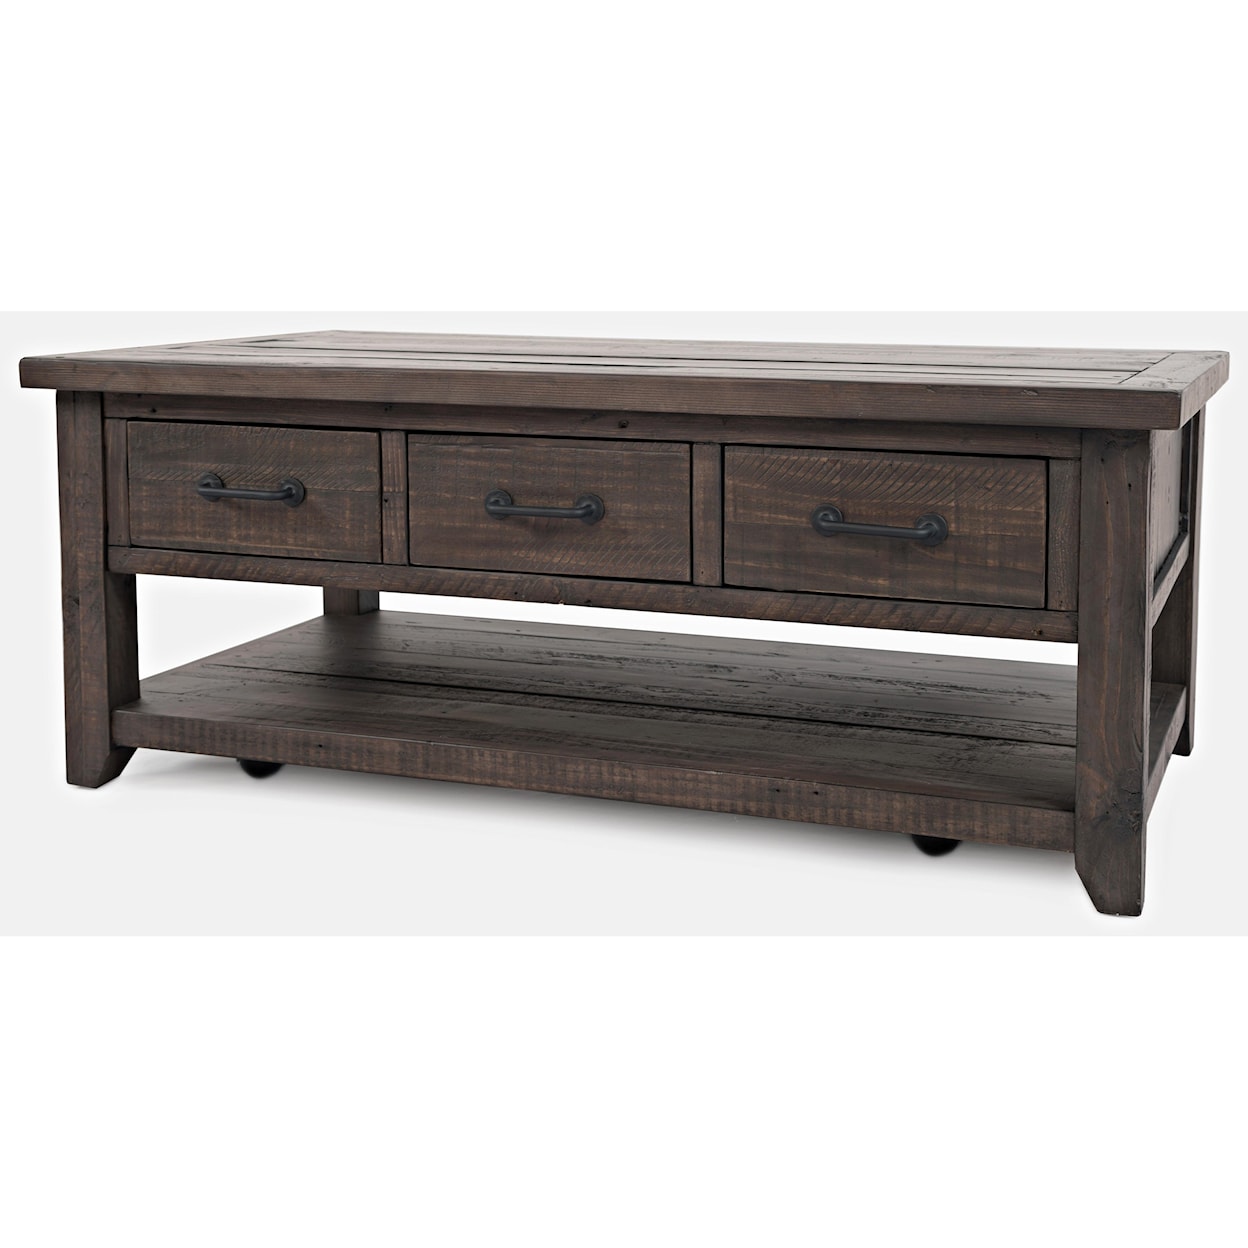 VFM Signature Morgan County 3 Drawer Cocktail Table